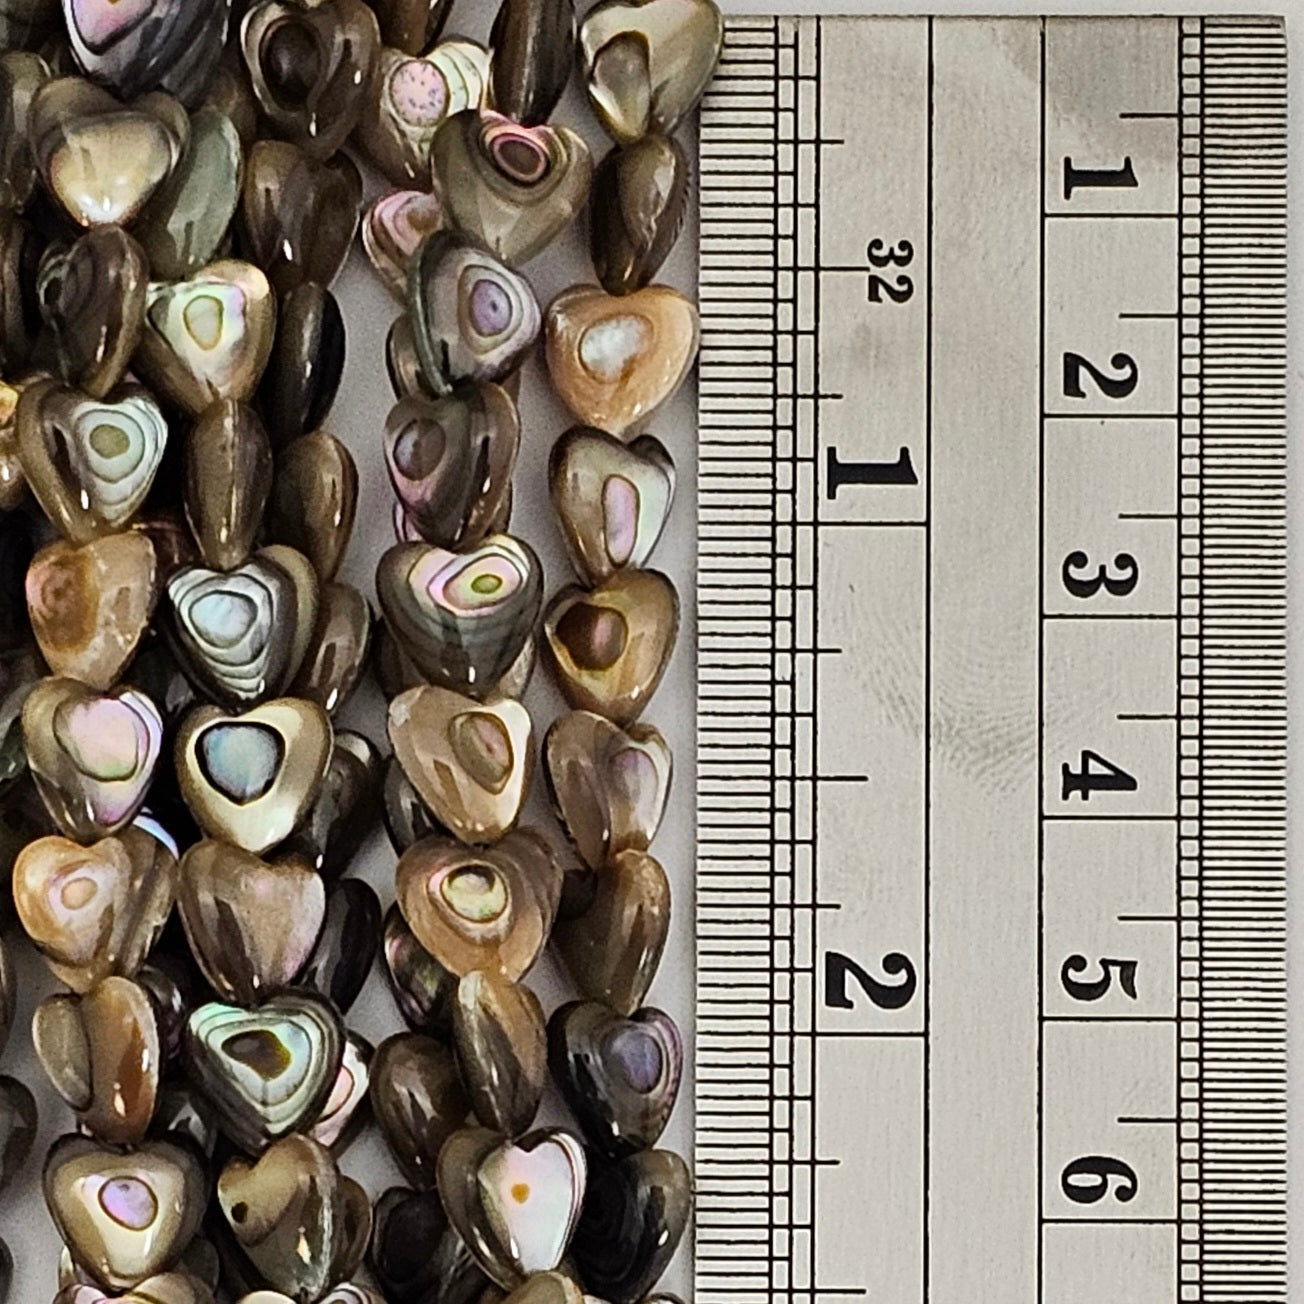 8mm Abalone Puffy Hearts - North American